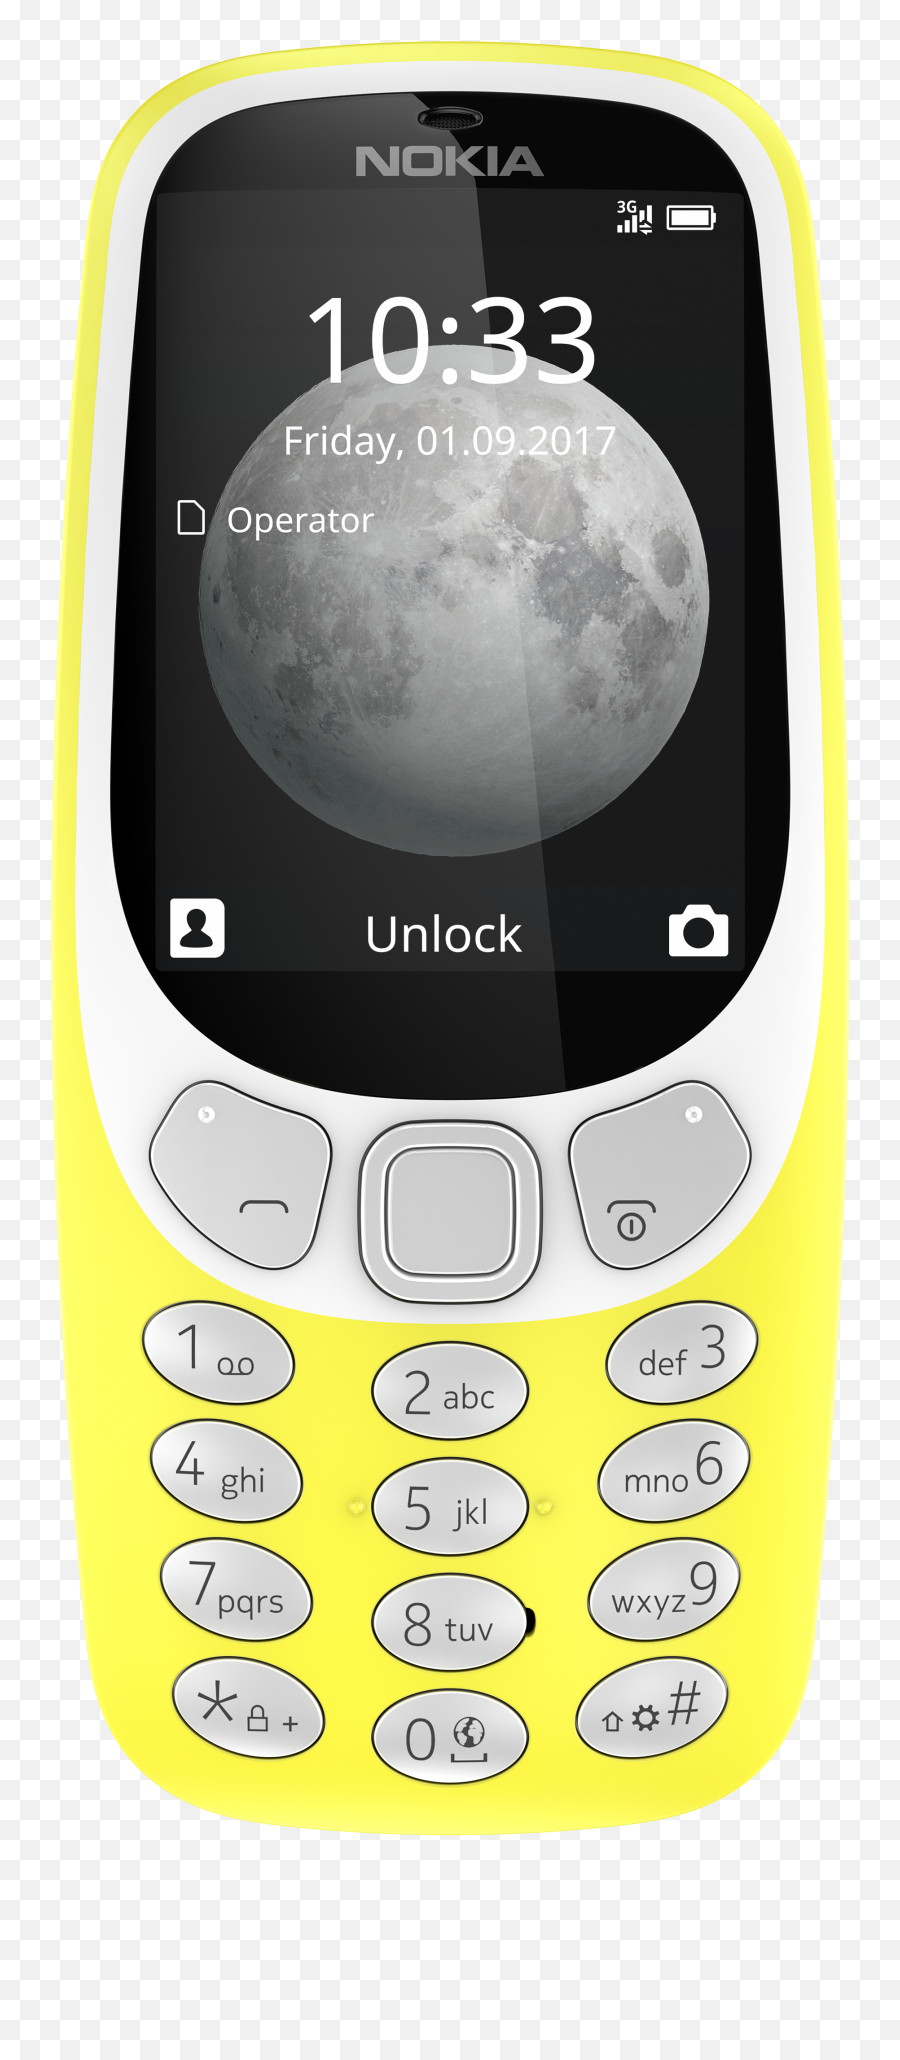 Nokia 3310 3g Mobile Phone - Nokia 3310 Png,Alcatel One Touch Pop Icon Tracfone